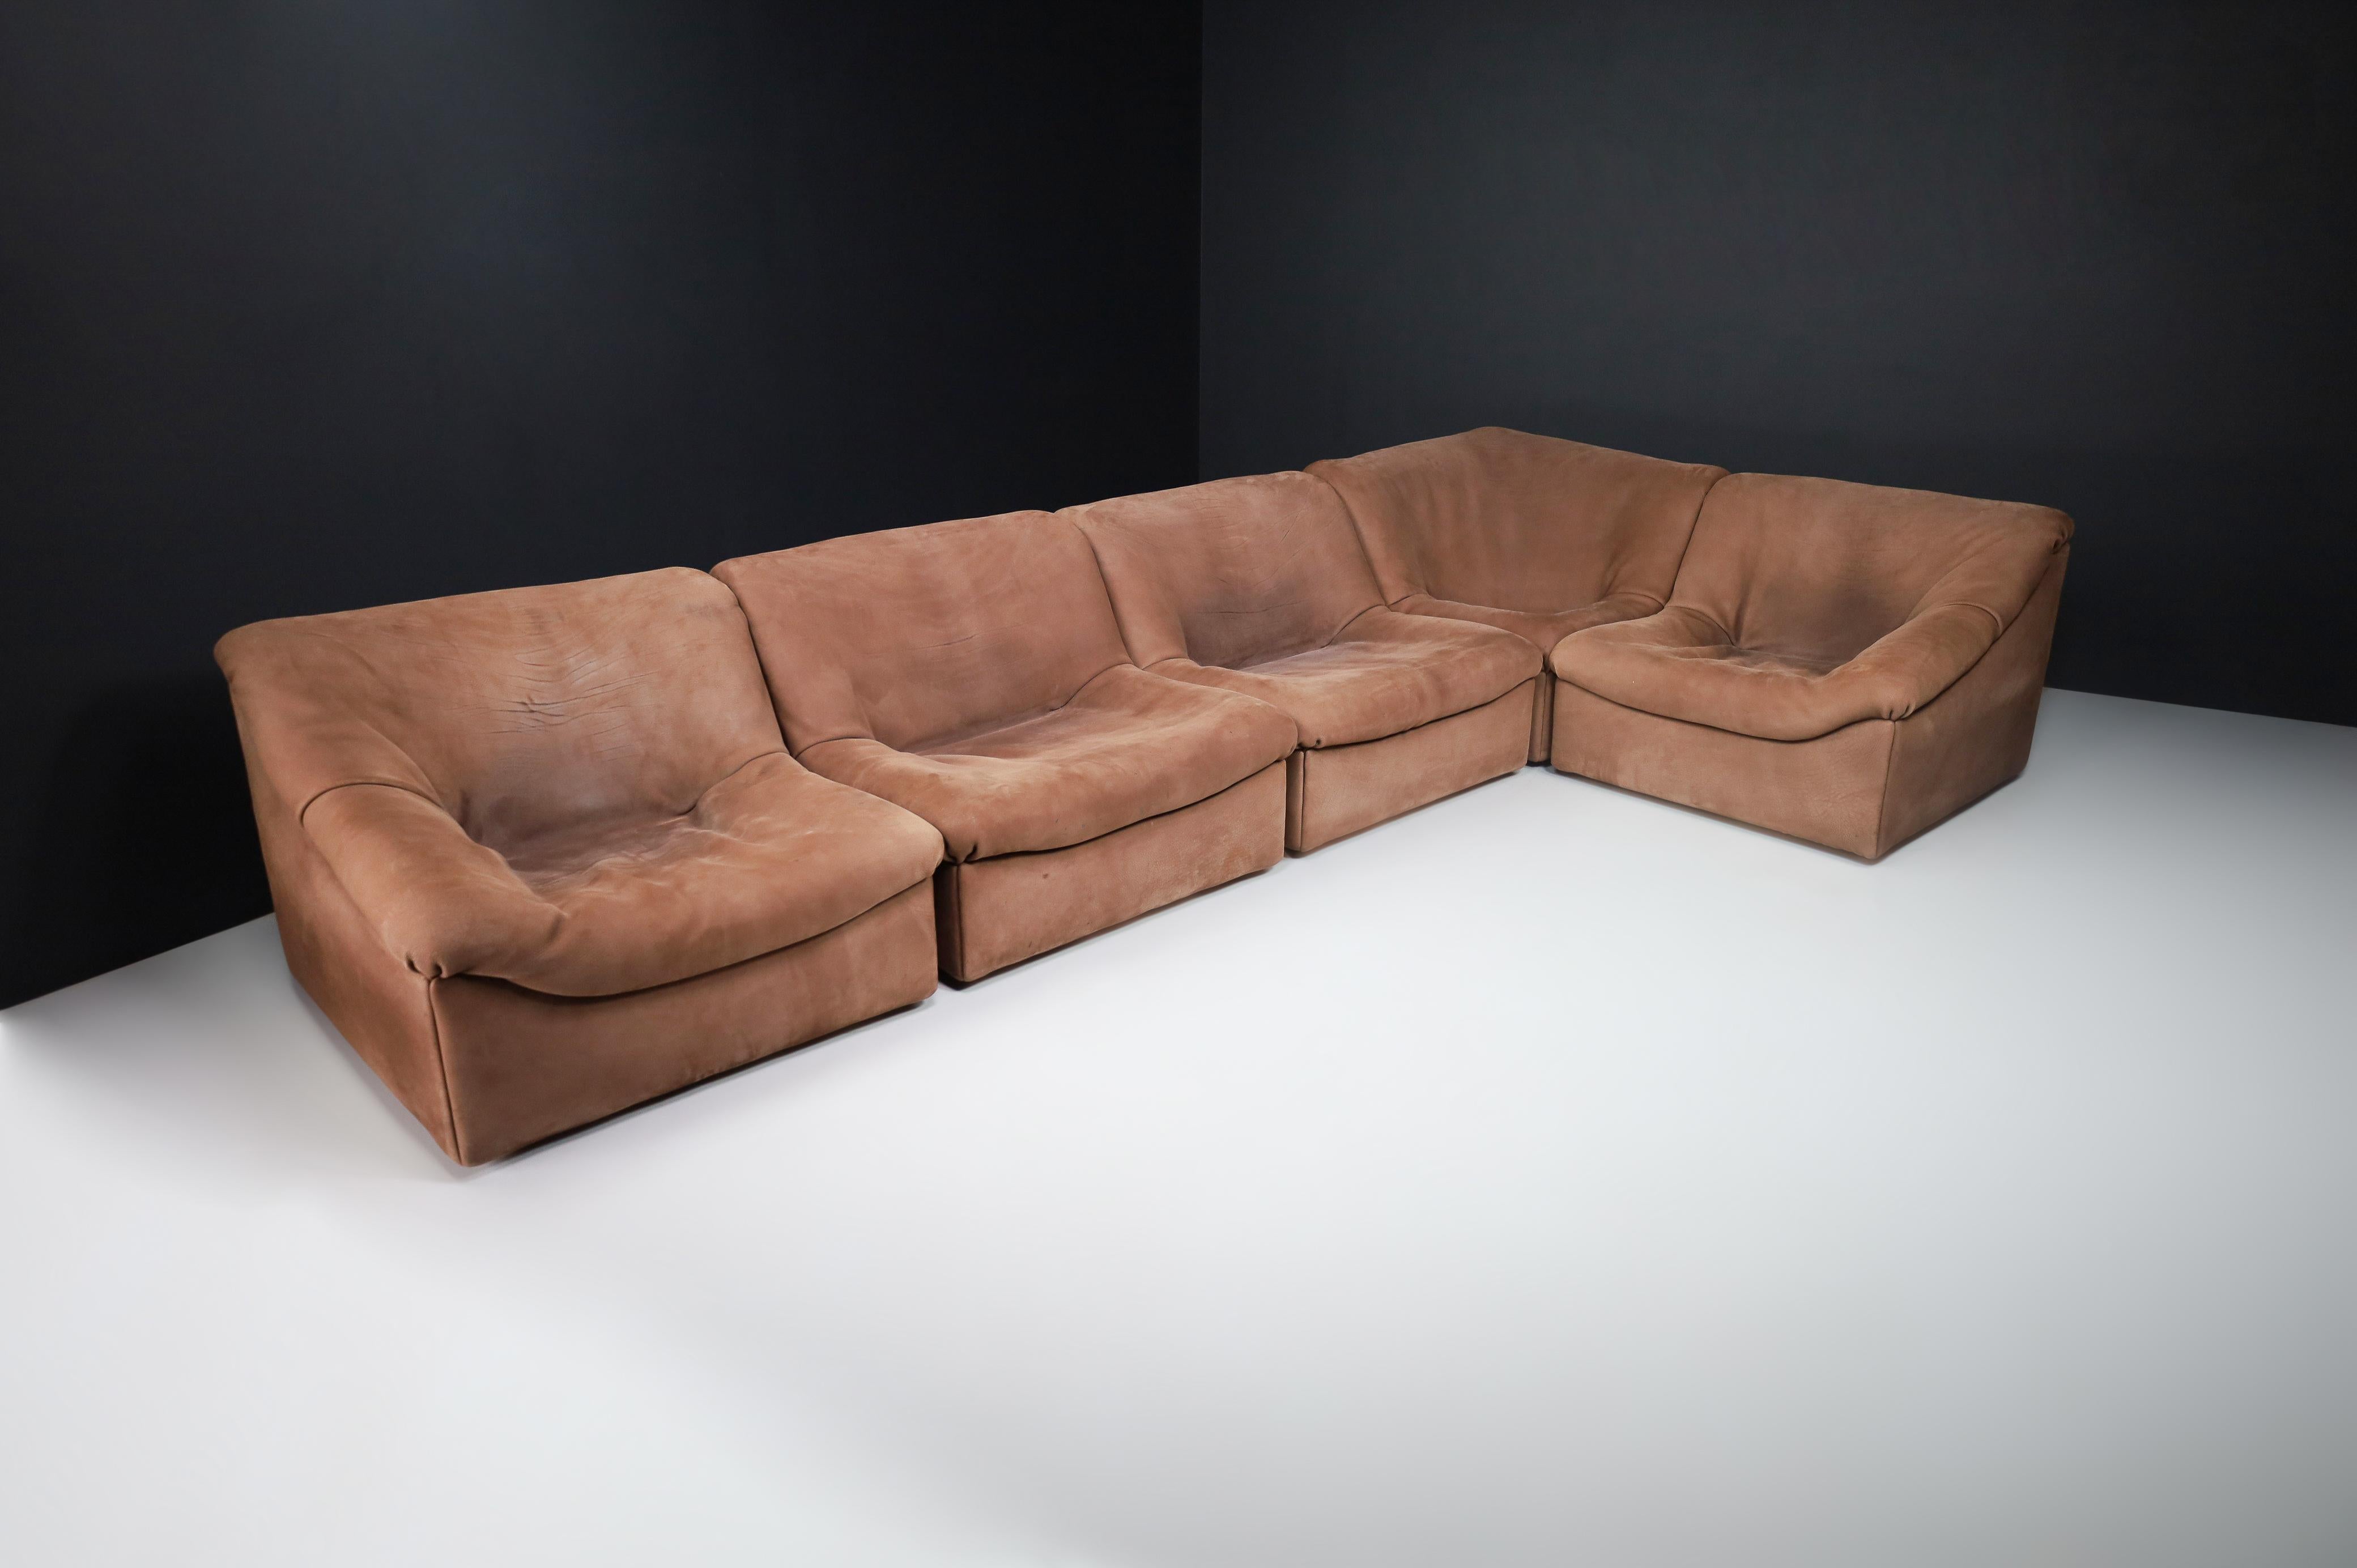 De Sede DS46 Sectional Sofa-Livingroomset in Buffalo Leather, Switzerland 1970s For Sale 3